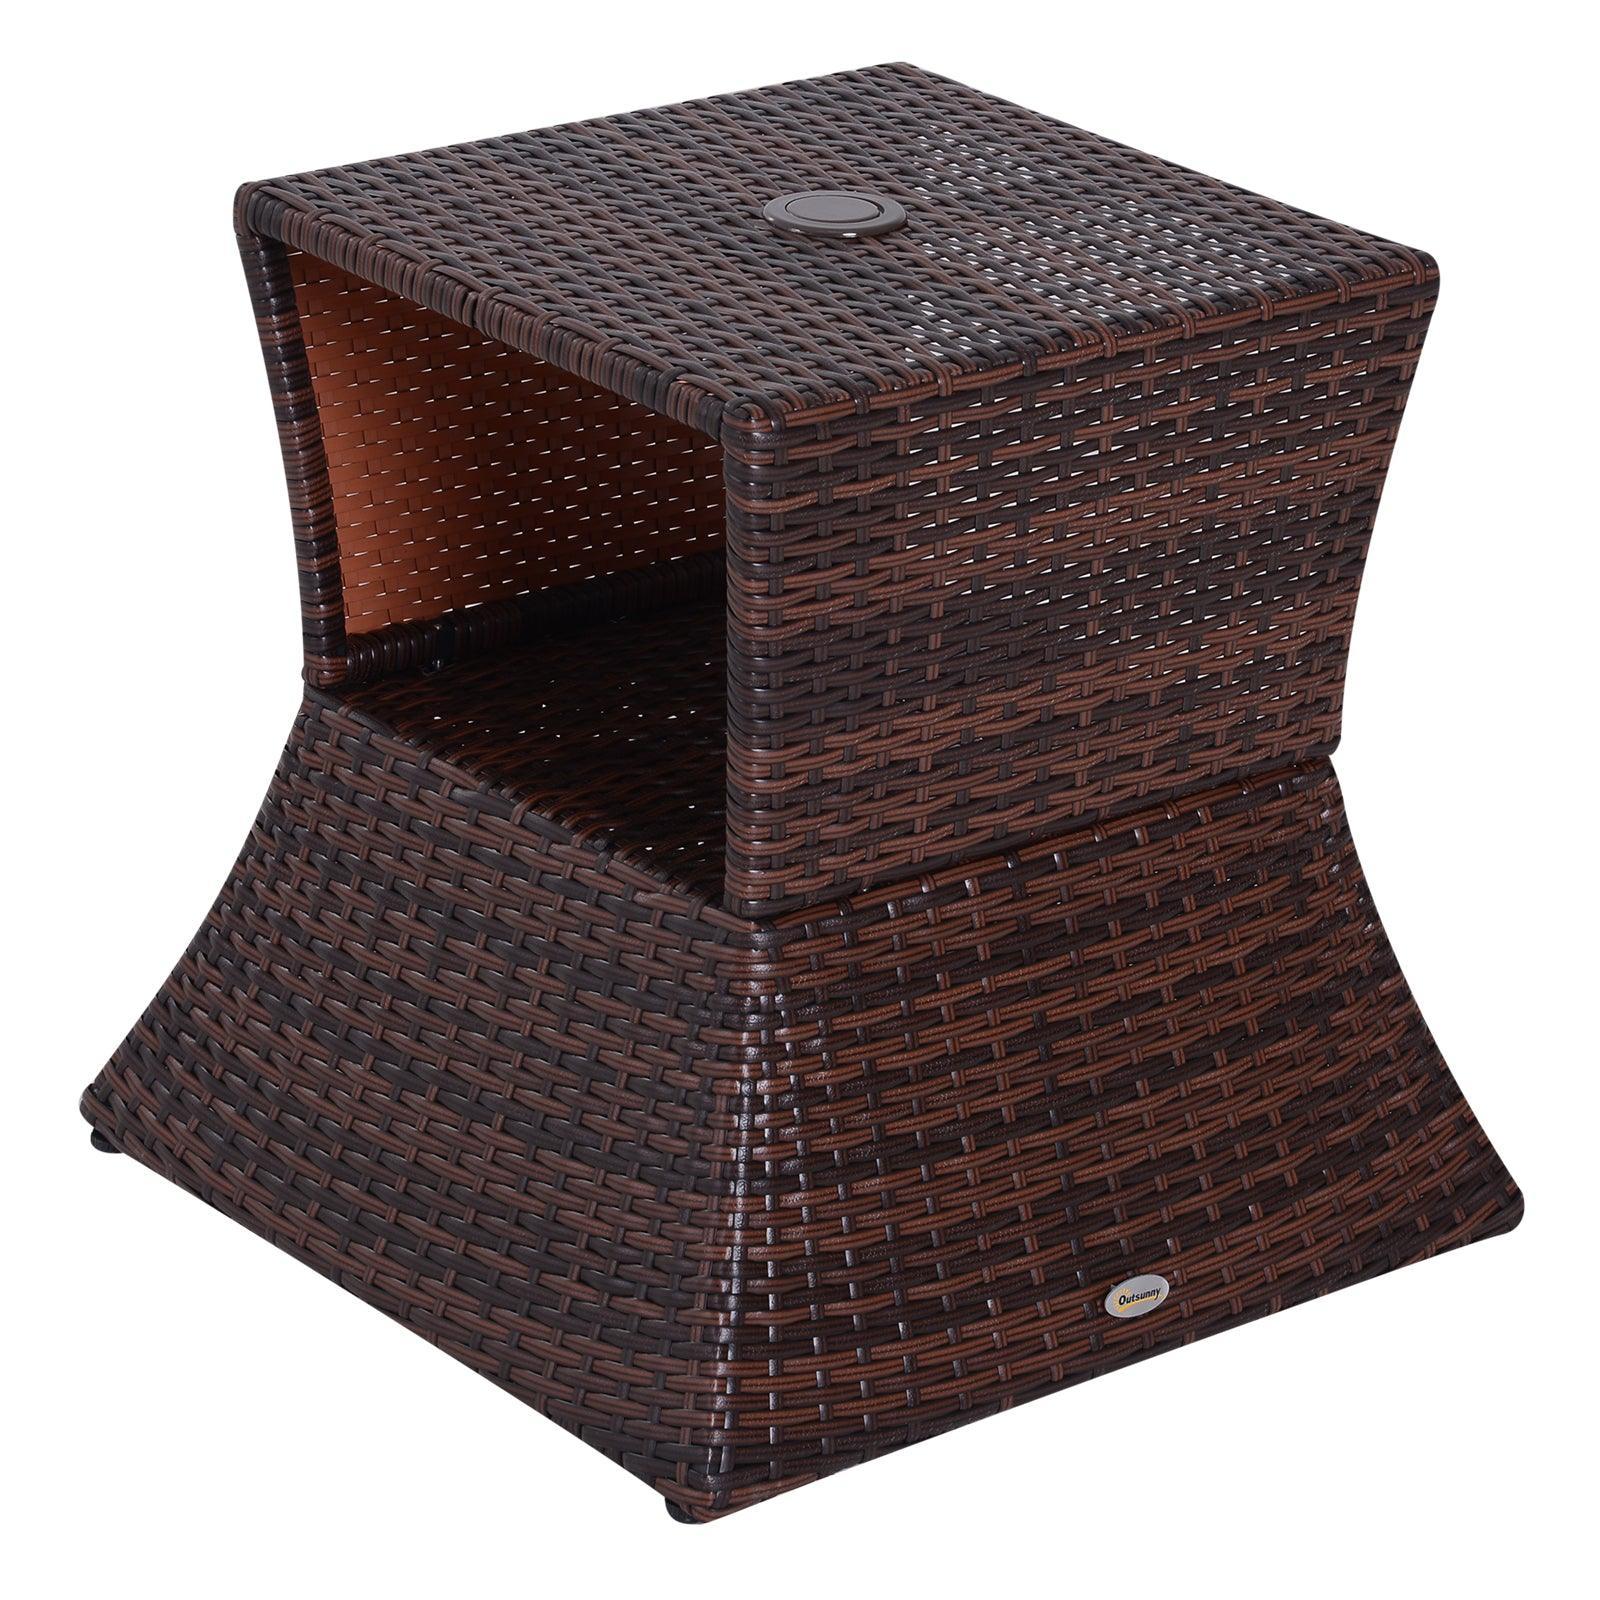 Outsunny Outdoor Rattan Table with Umbrella Hole & Storage, Brown - ALL4U RETAILER LTD